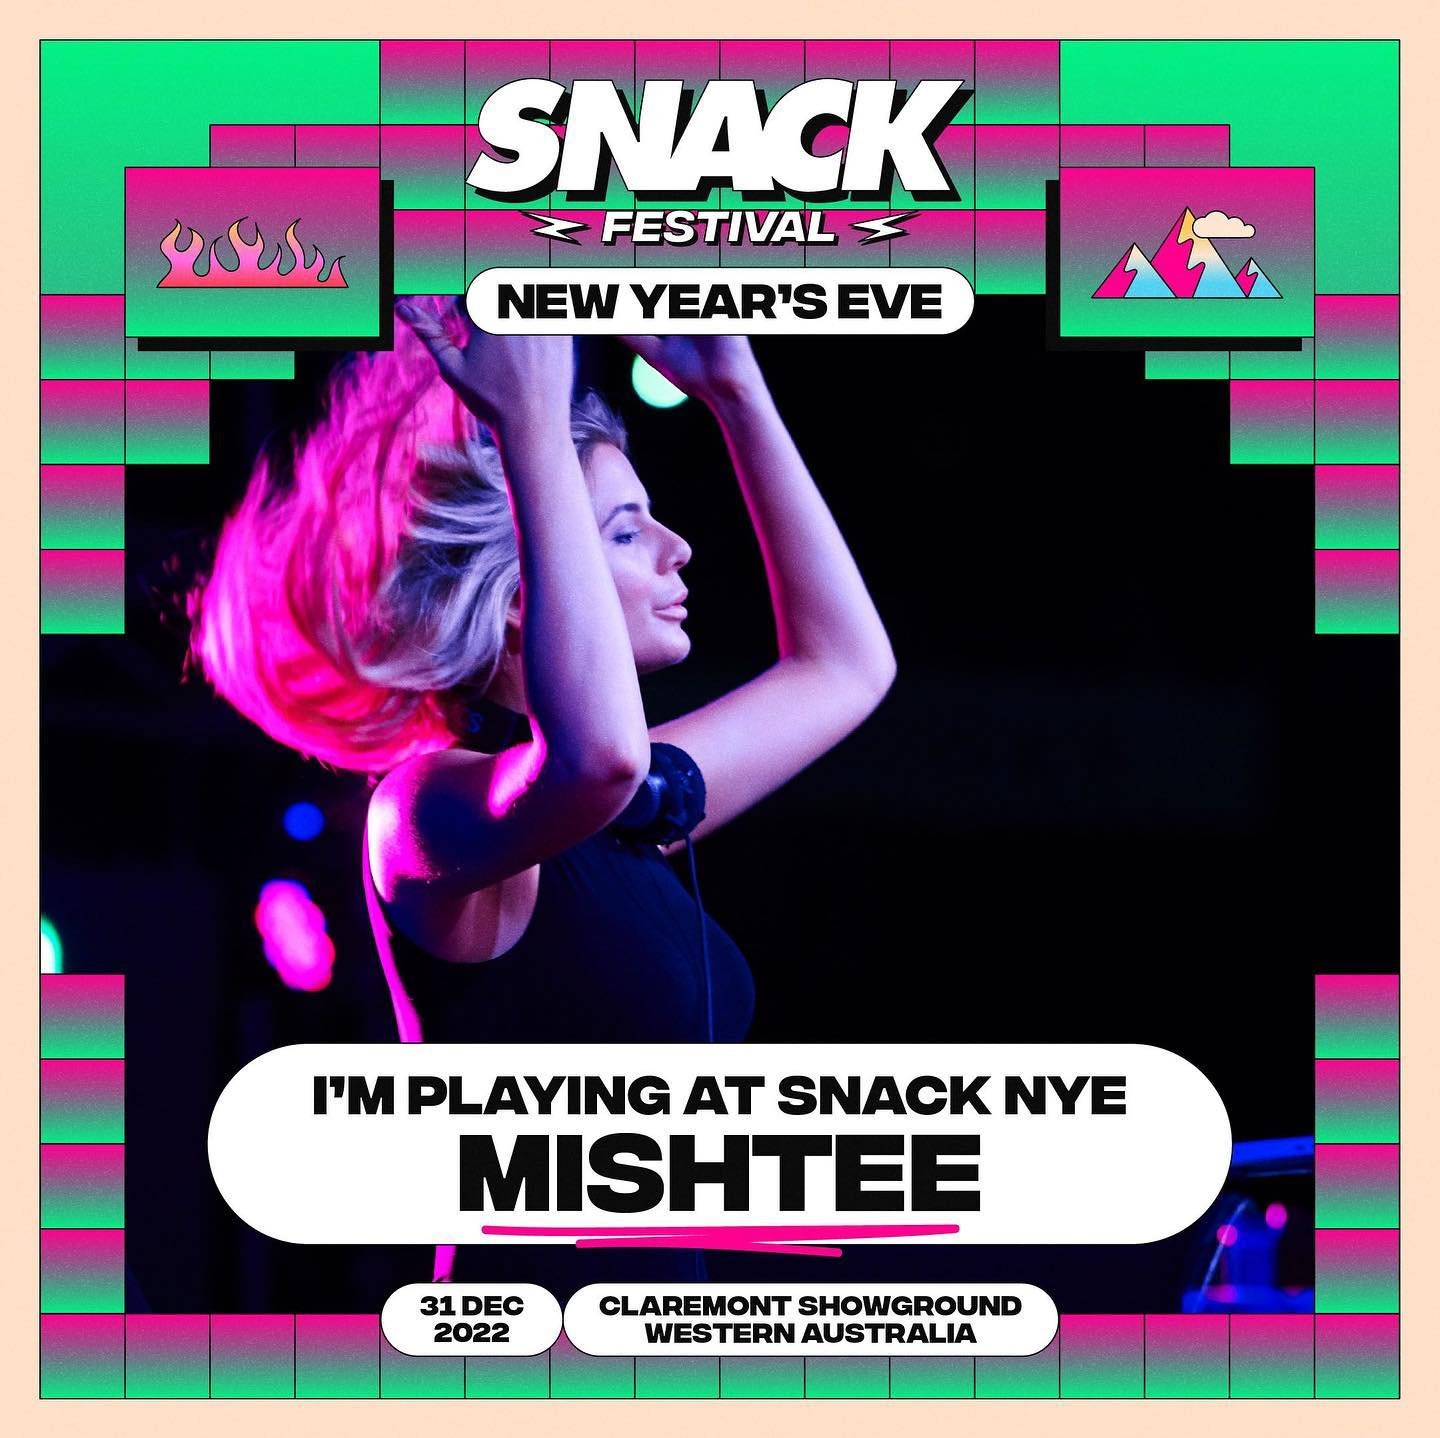 Finishing 2022 playing NYE at @snack.festival and NYD 2023 at @backinthedayperth 🎧🤍